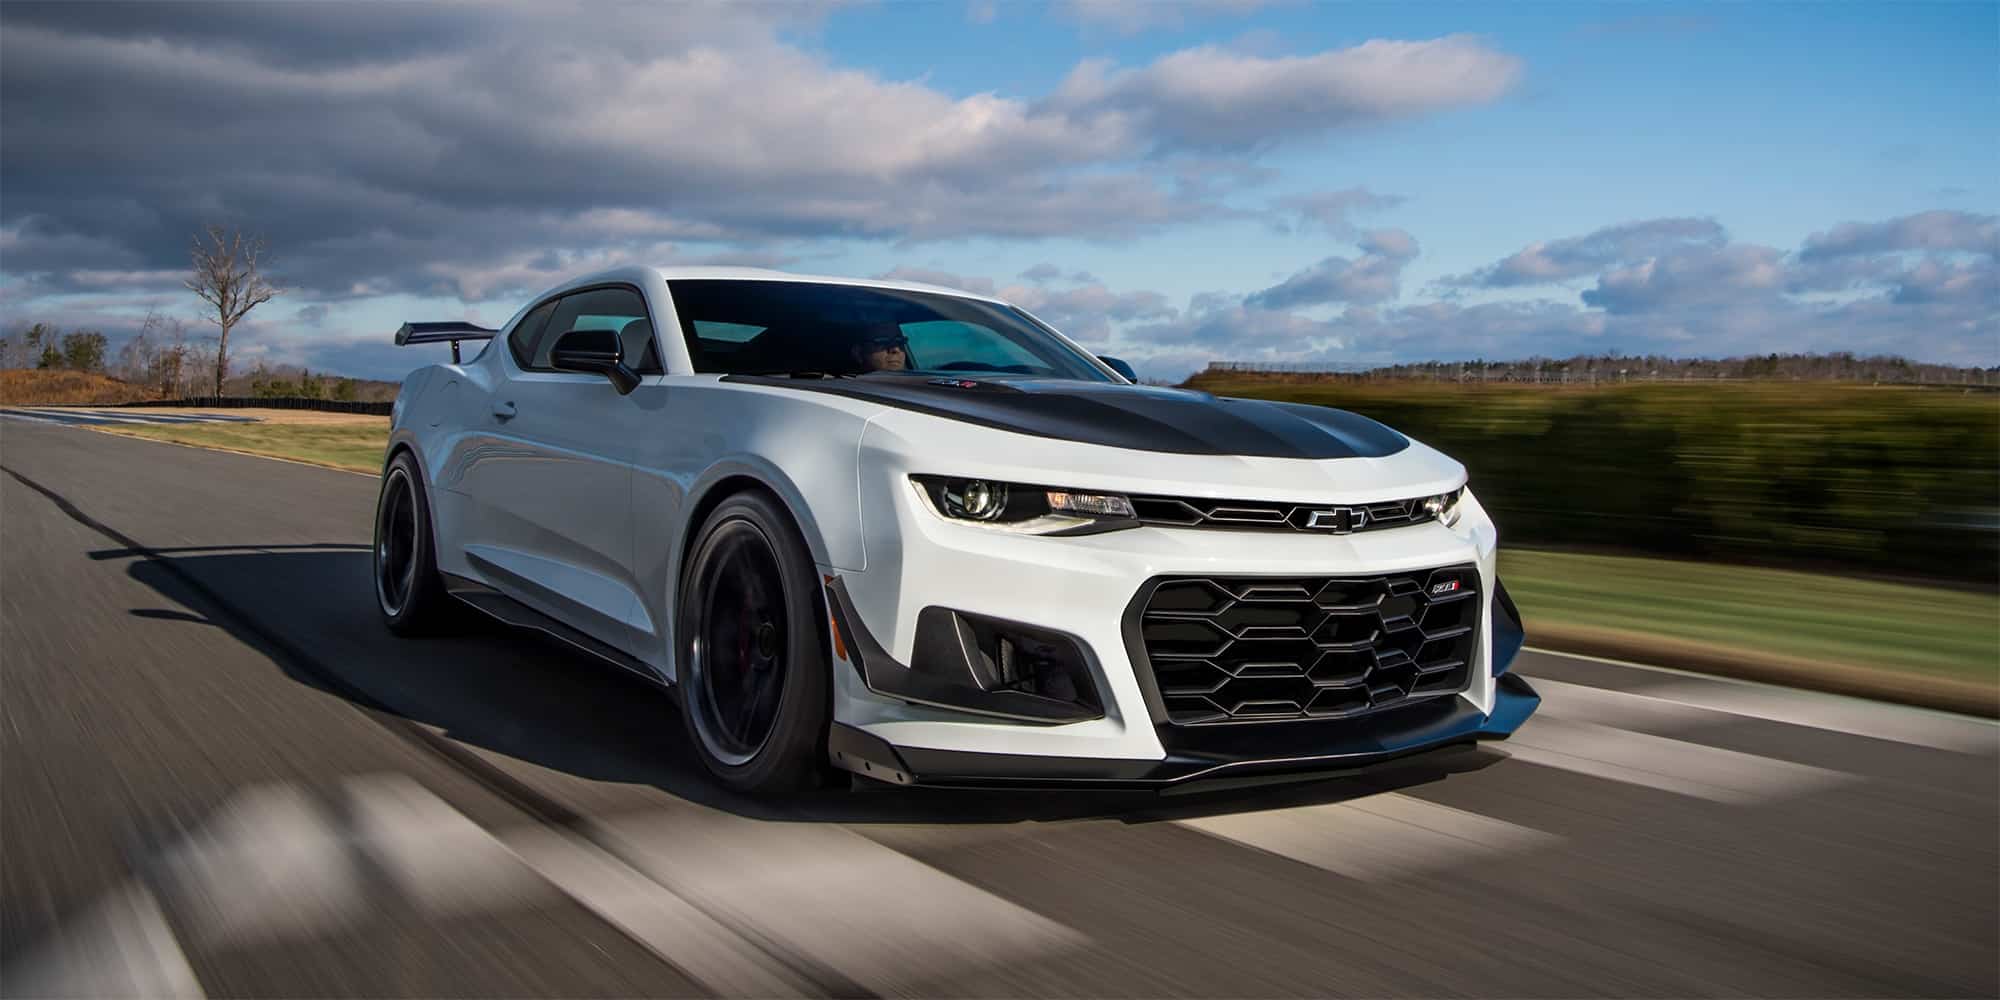 2018 Camaro ZL1 1LE white color front side view on highway in speed blur background 4k hd wallpaper